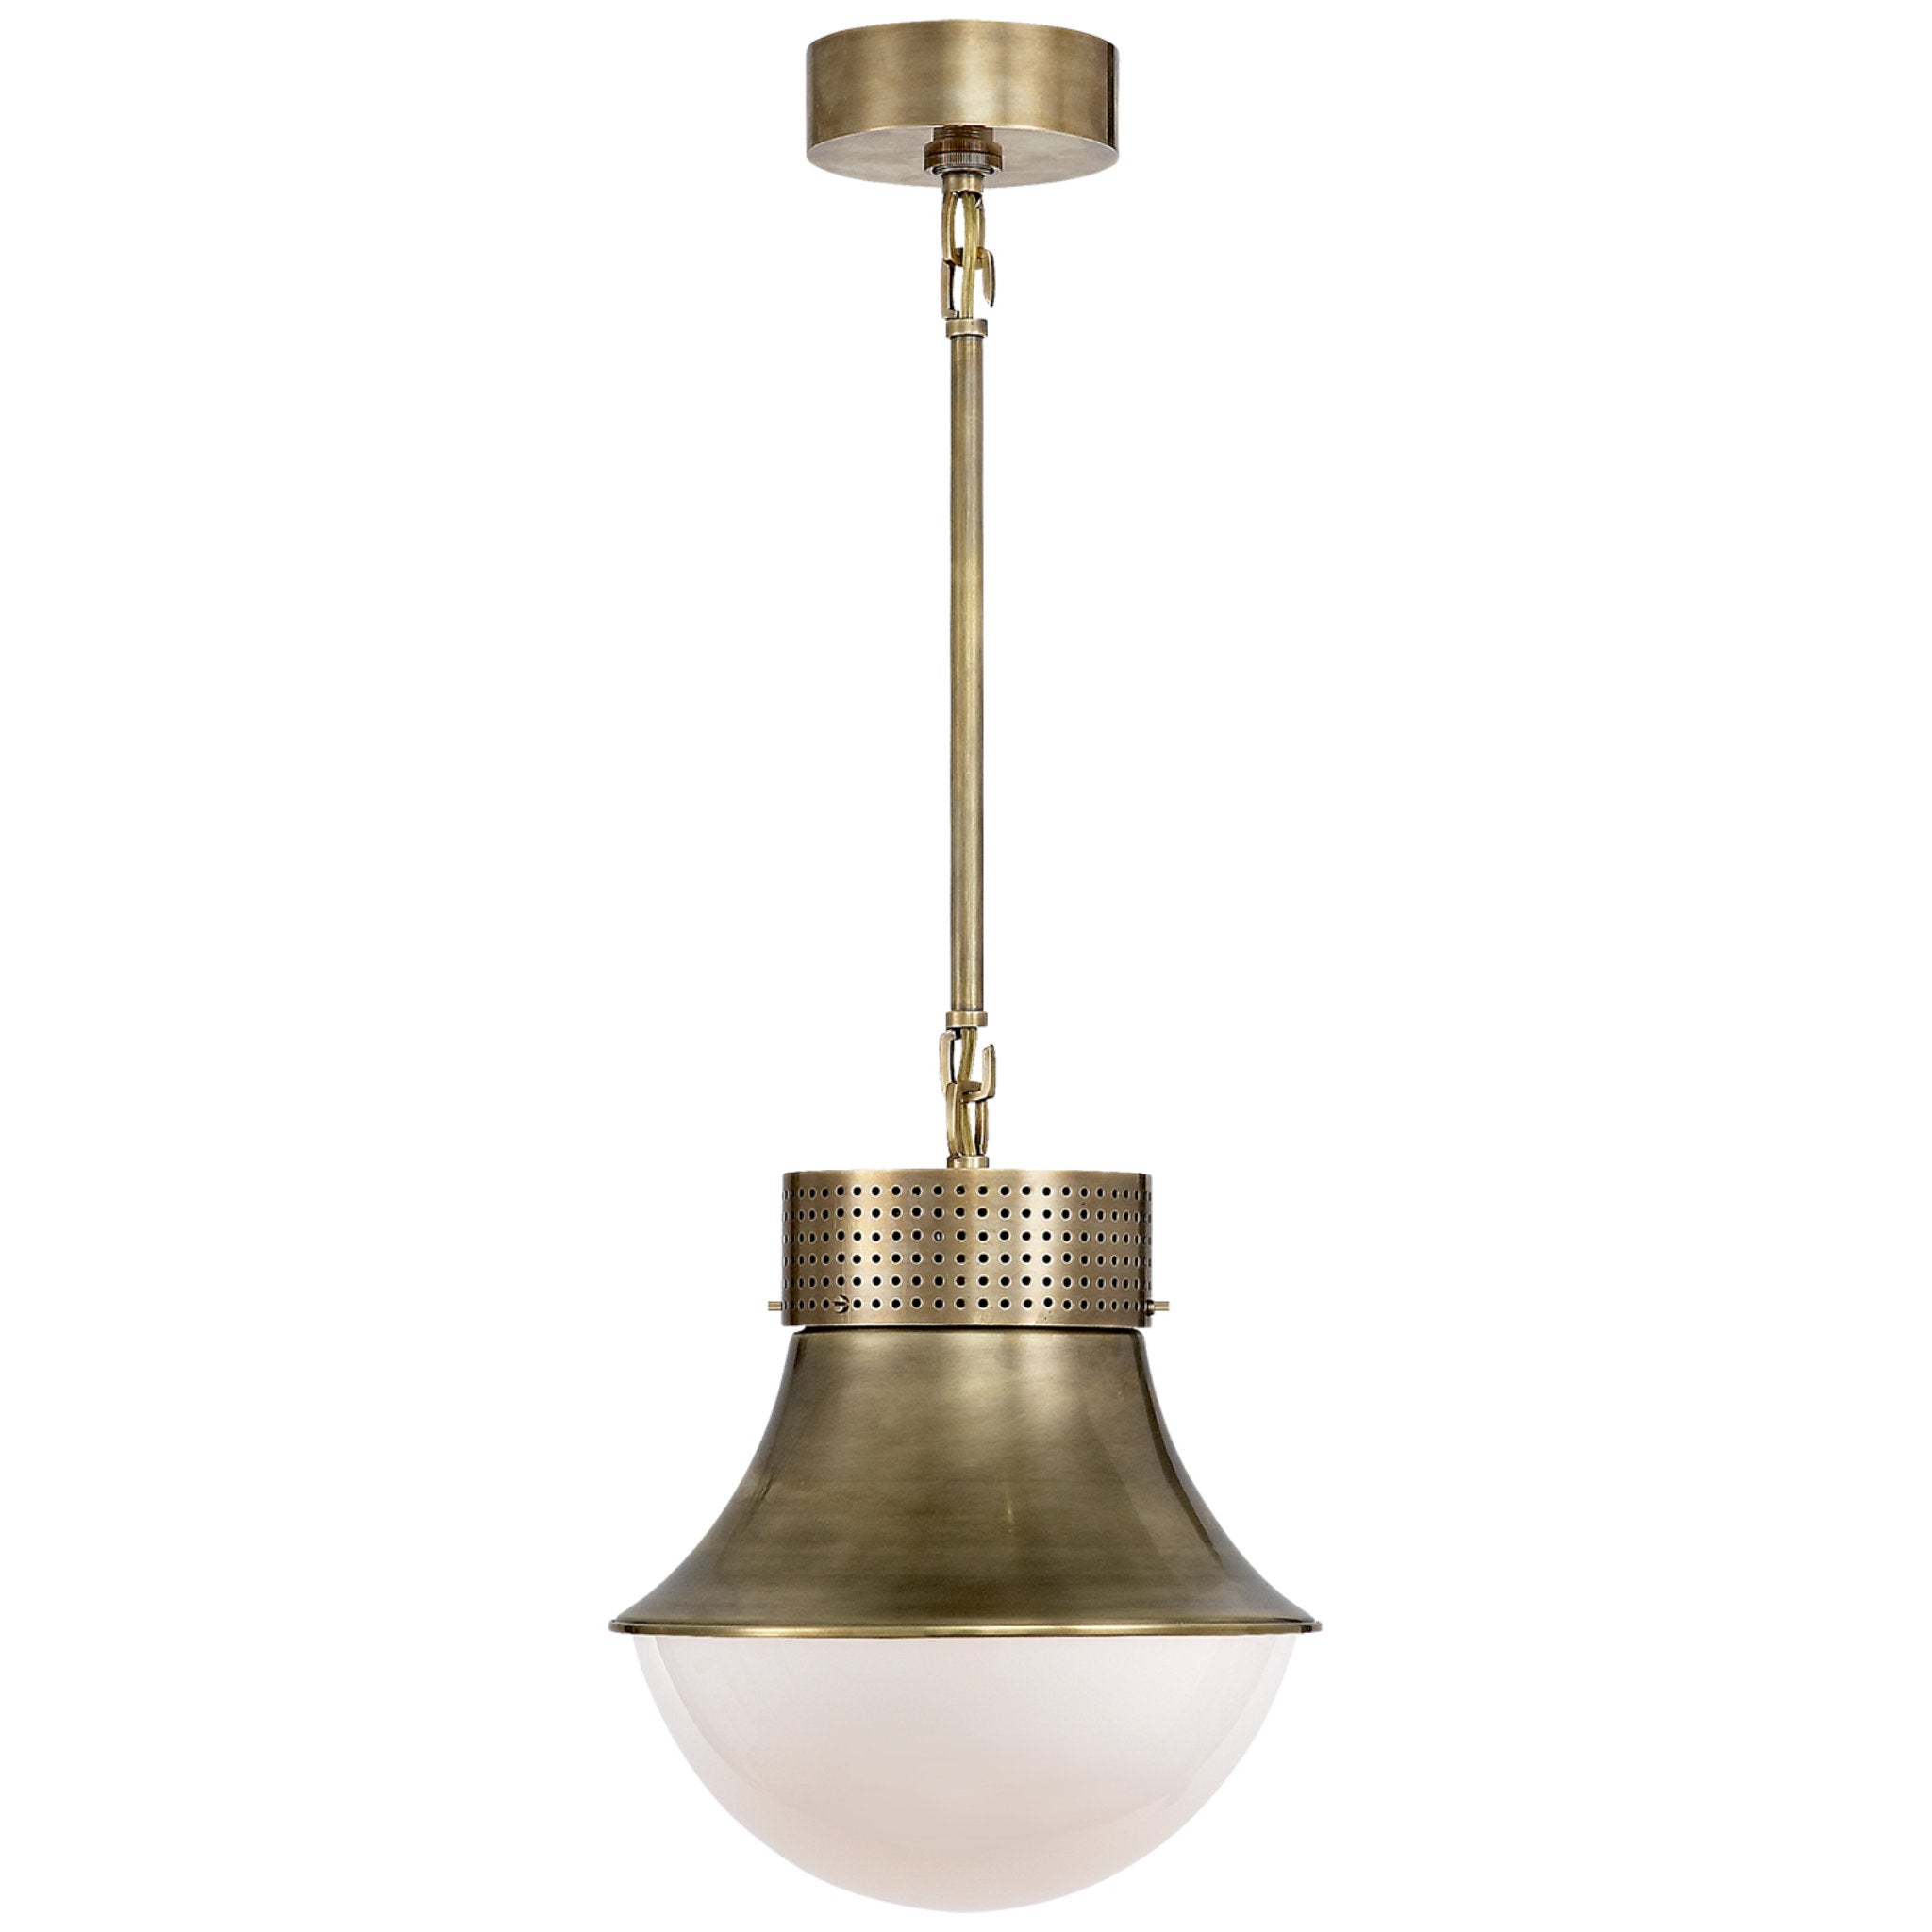 Kelly Wearstler Precision Small Pendant in Antique-Burnished Brass with White Glass